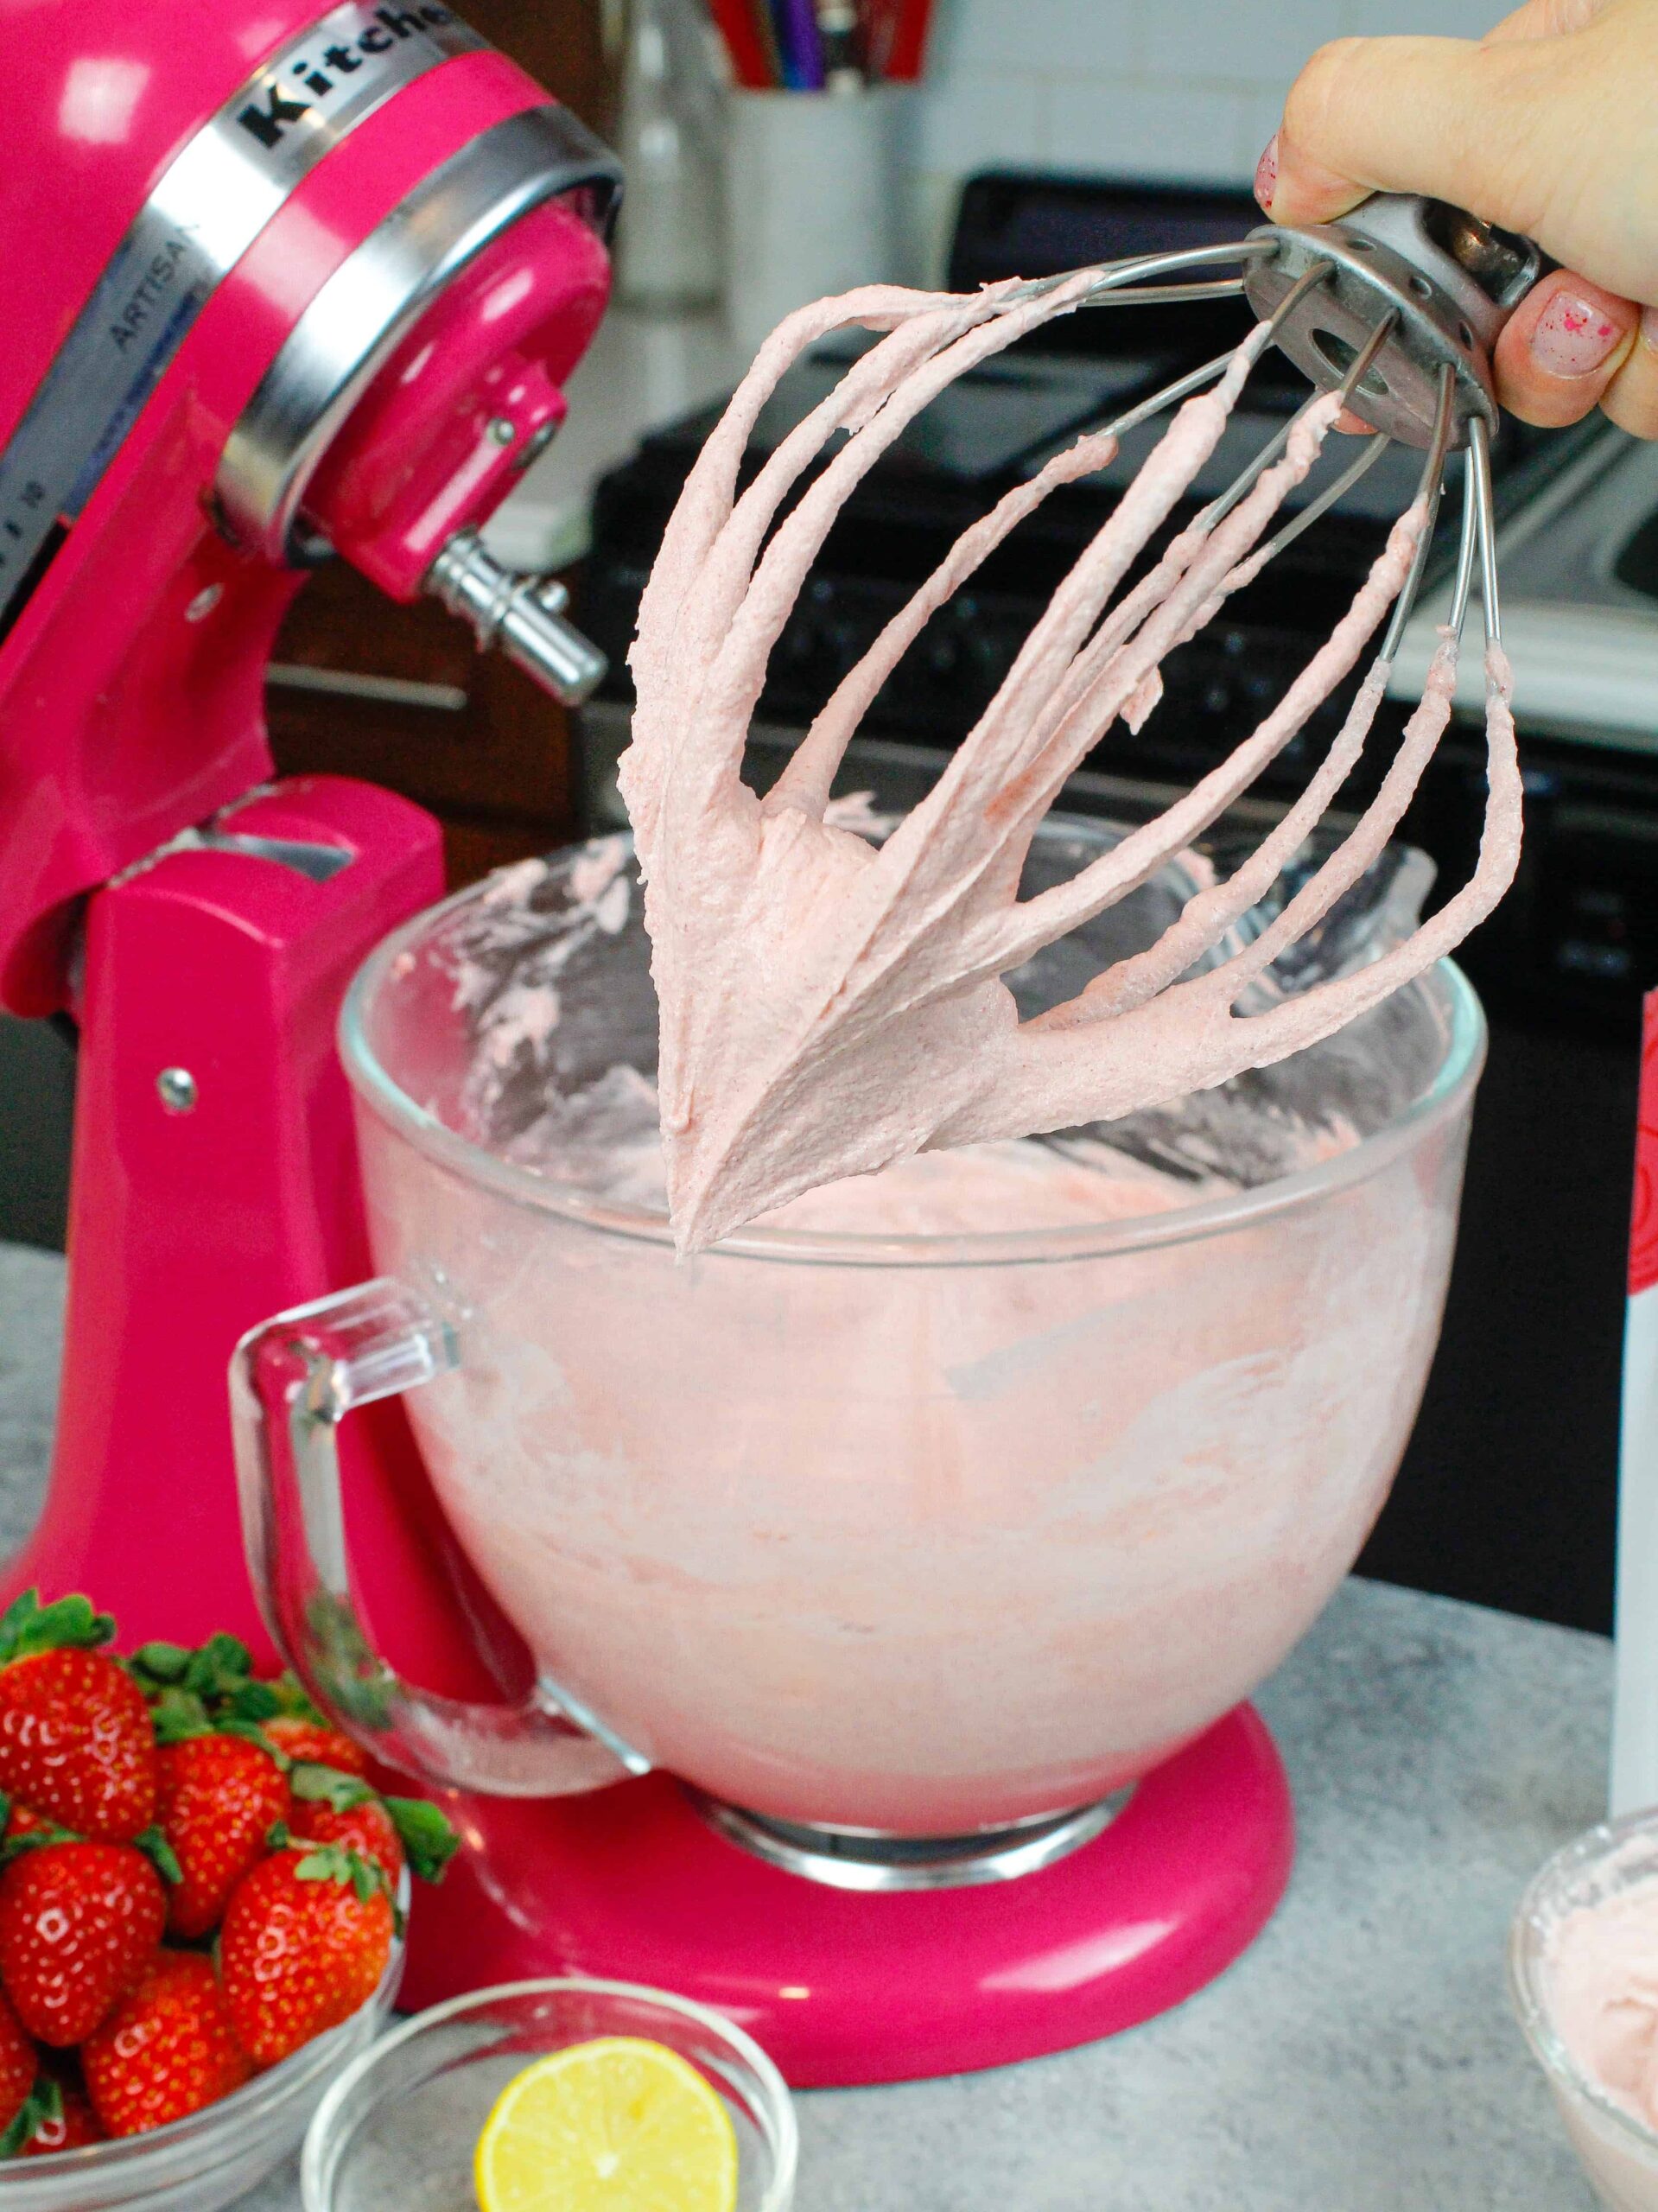 image of the best strawberry buttercream on whisk attachment with kitchenaid mixer in the background